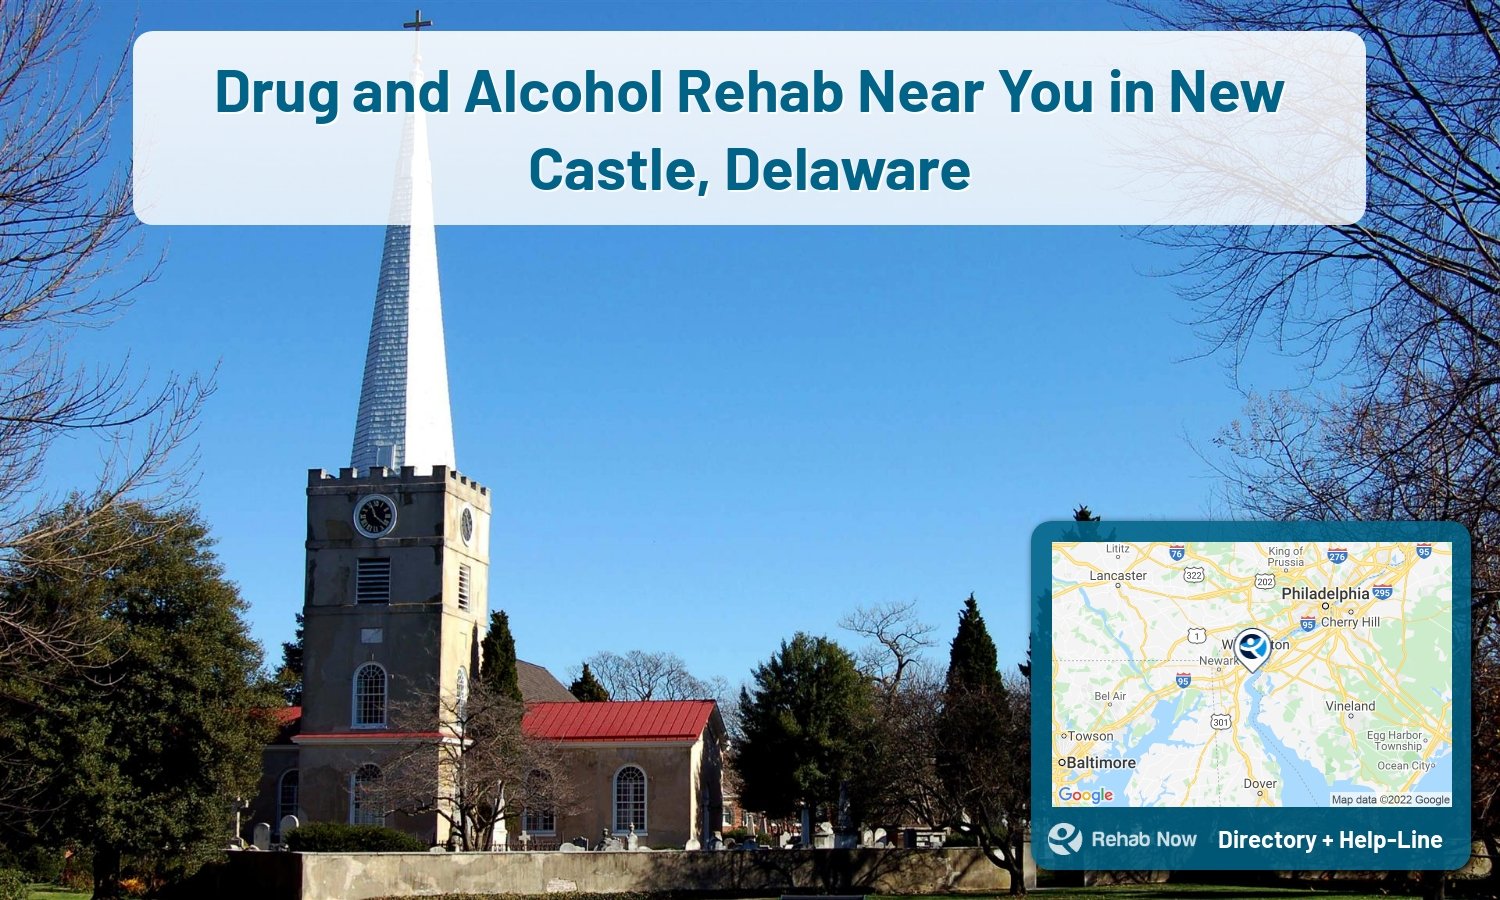 Our experts can help you find treatment now in New Castle, Delaware. We list drug rehab and alcohol centers in Delaware.